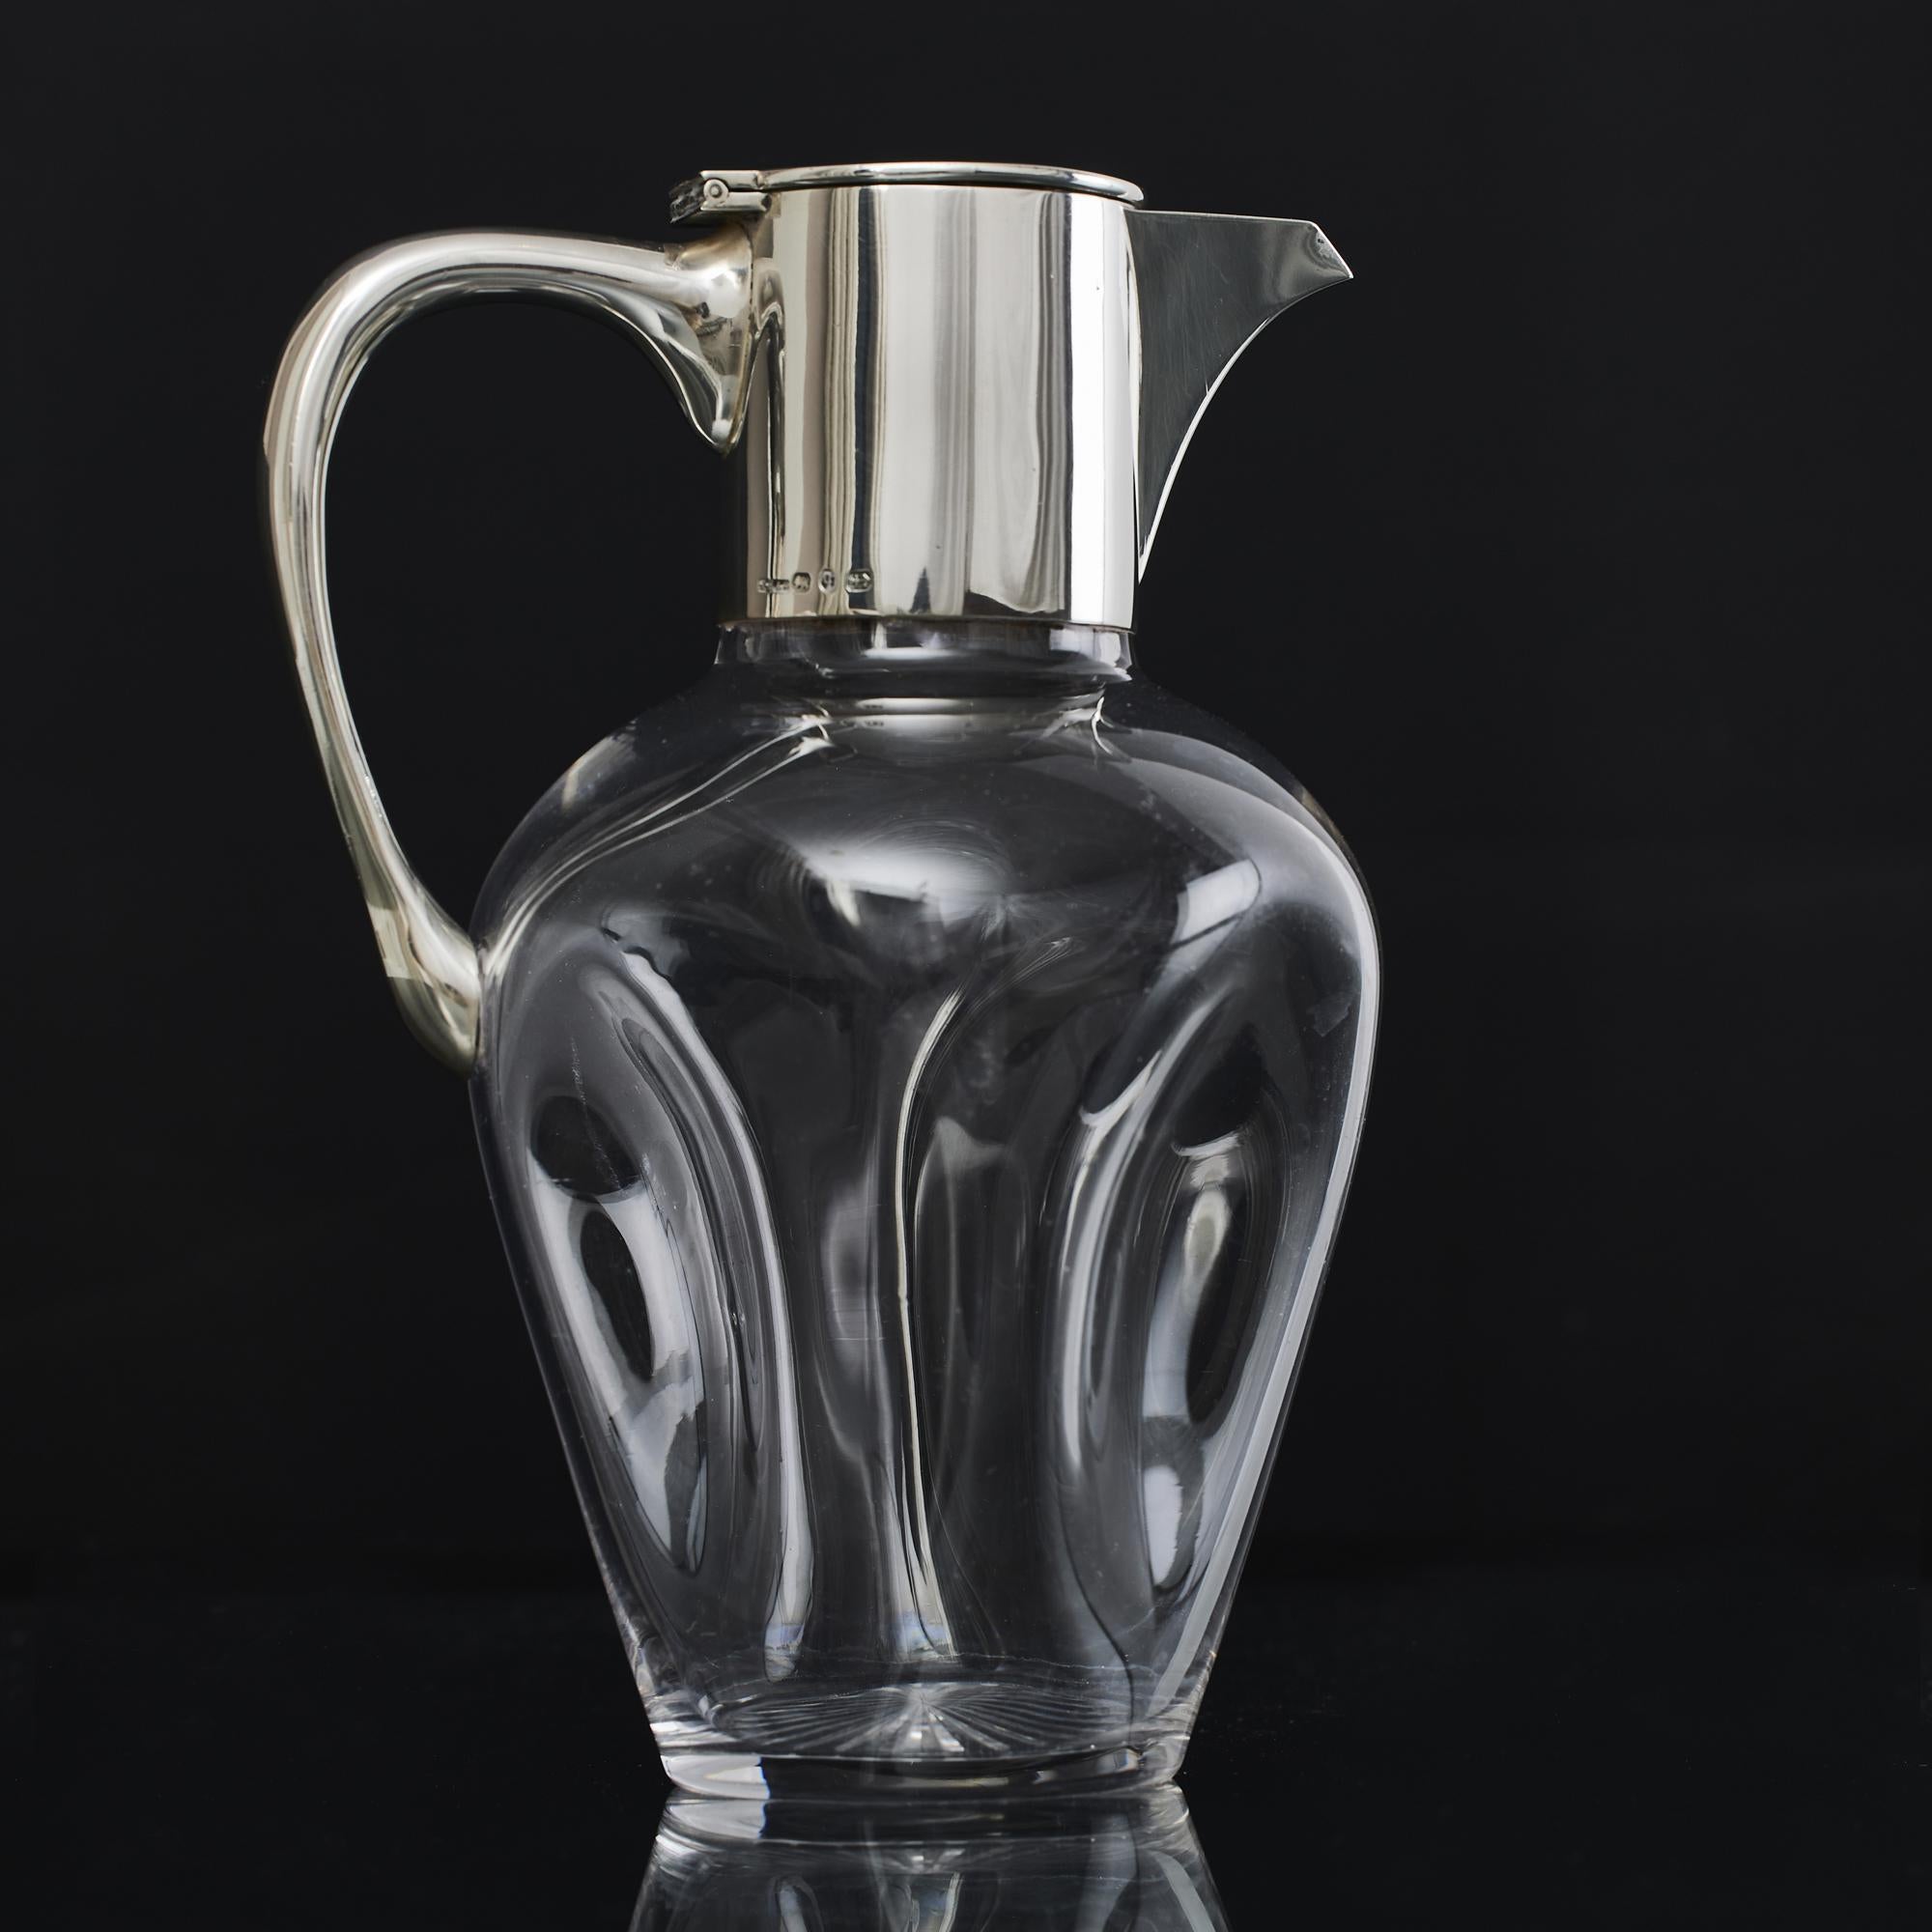 Antique, late-Victorian-era wine jug whose hand blown pinched plain glass body is very pleasingand silver mounts. The base is cut with a starburst pattern.